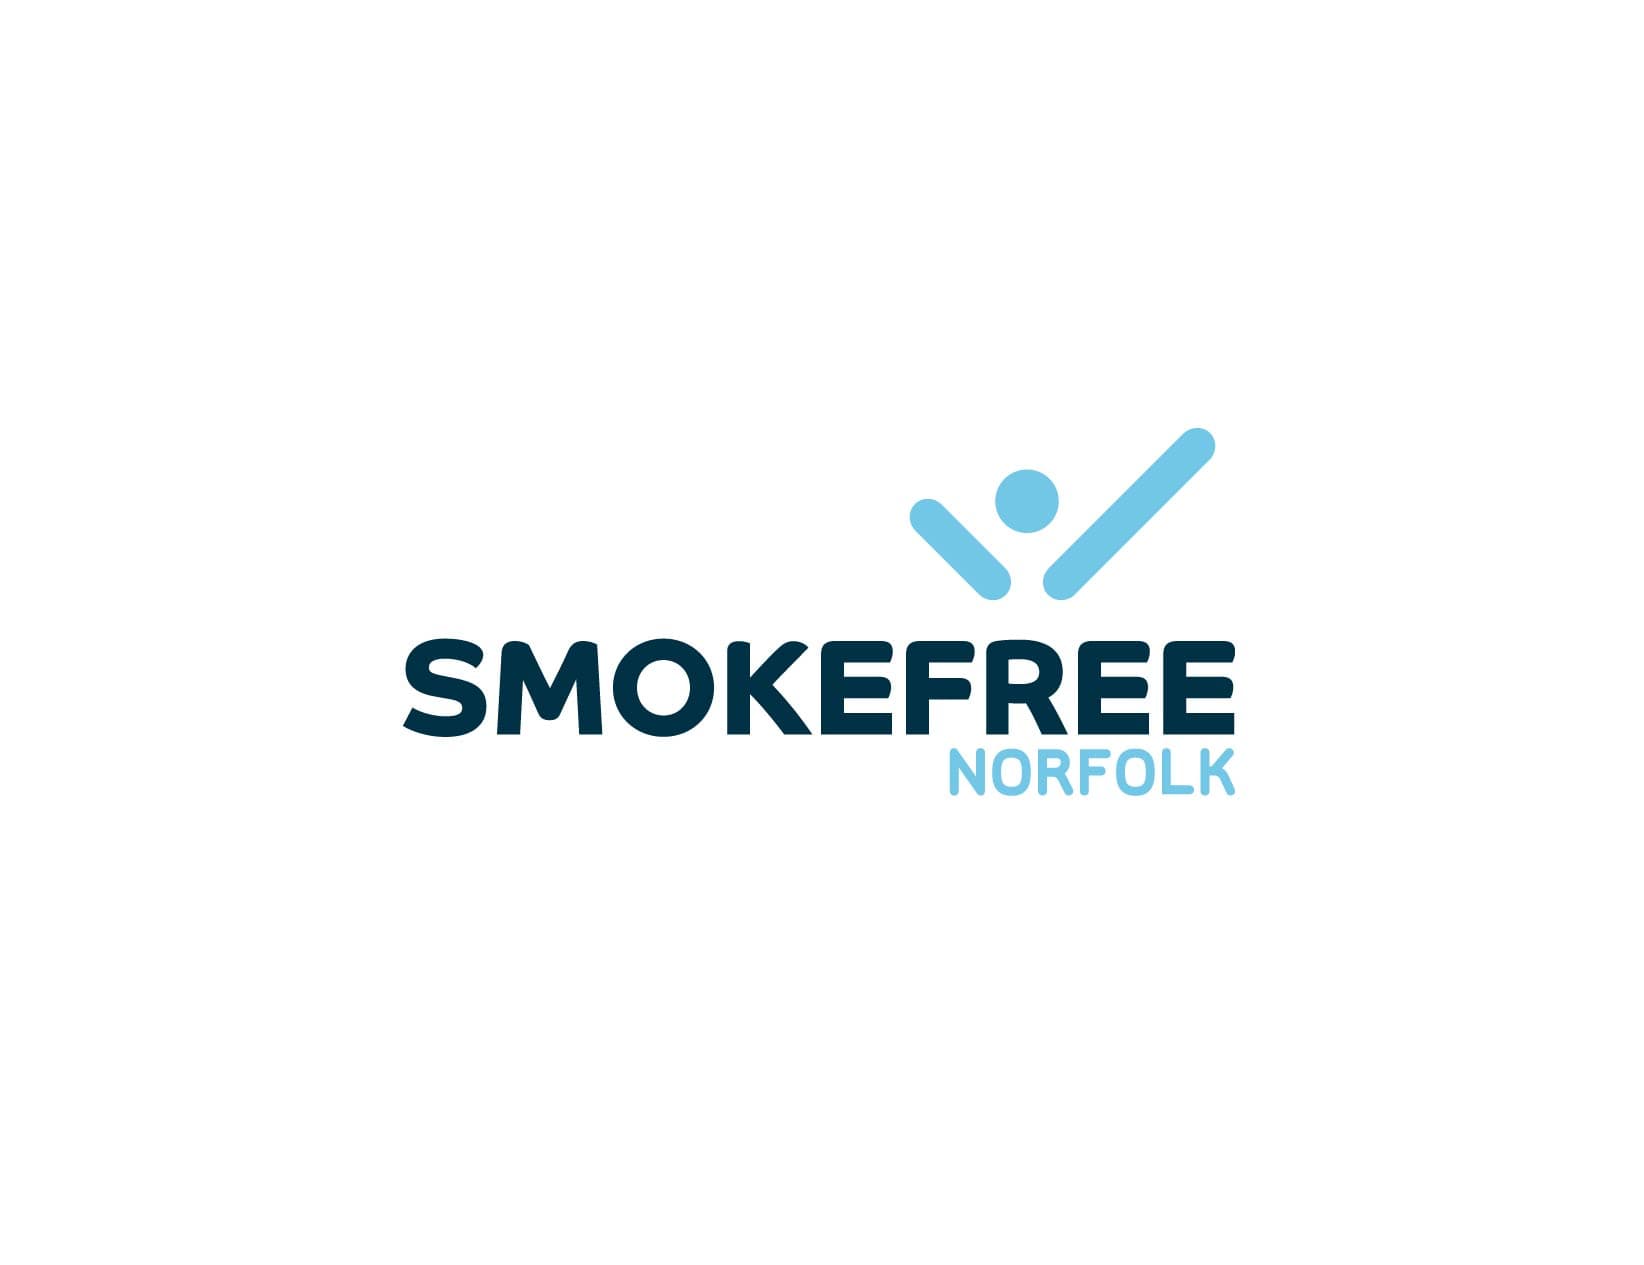 Article > Smokefree Norfolk Service launches